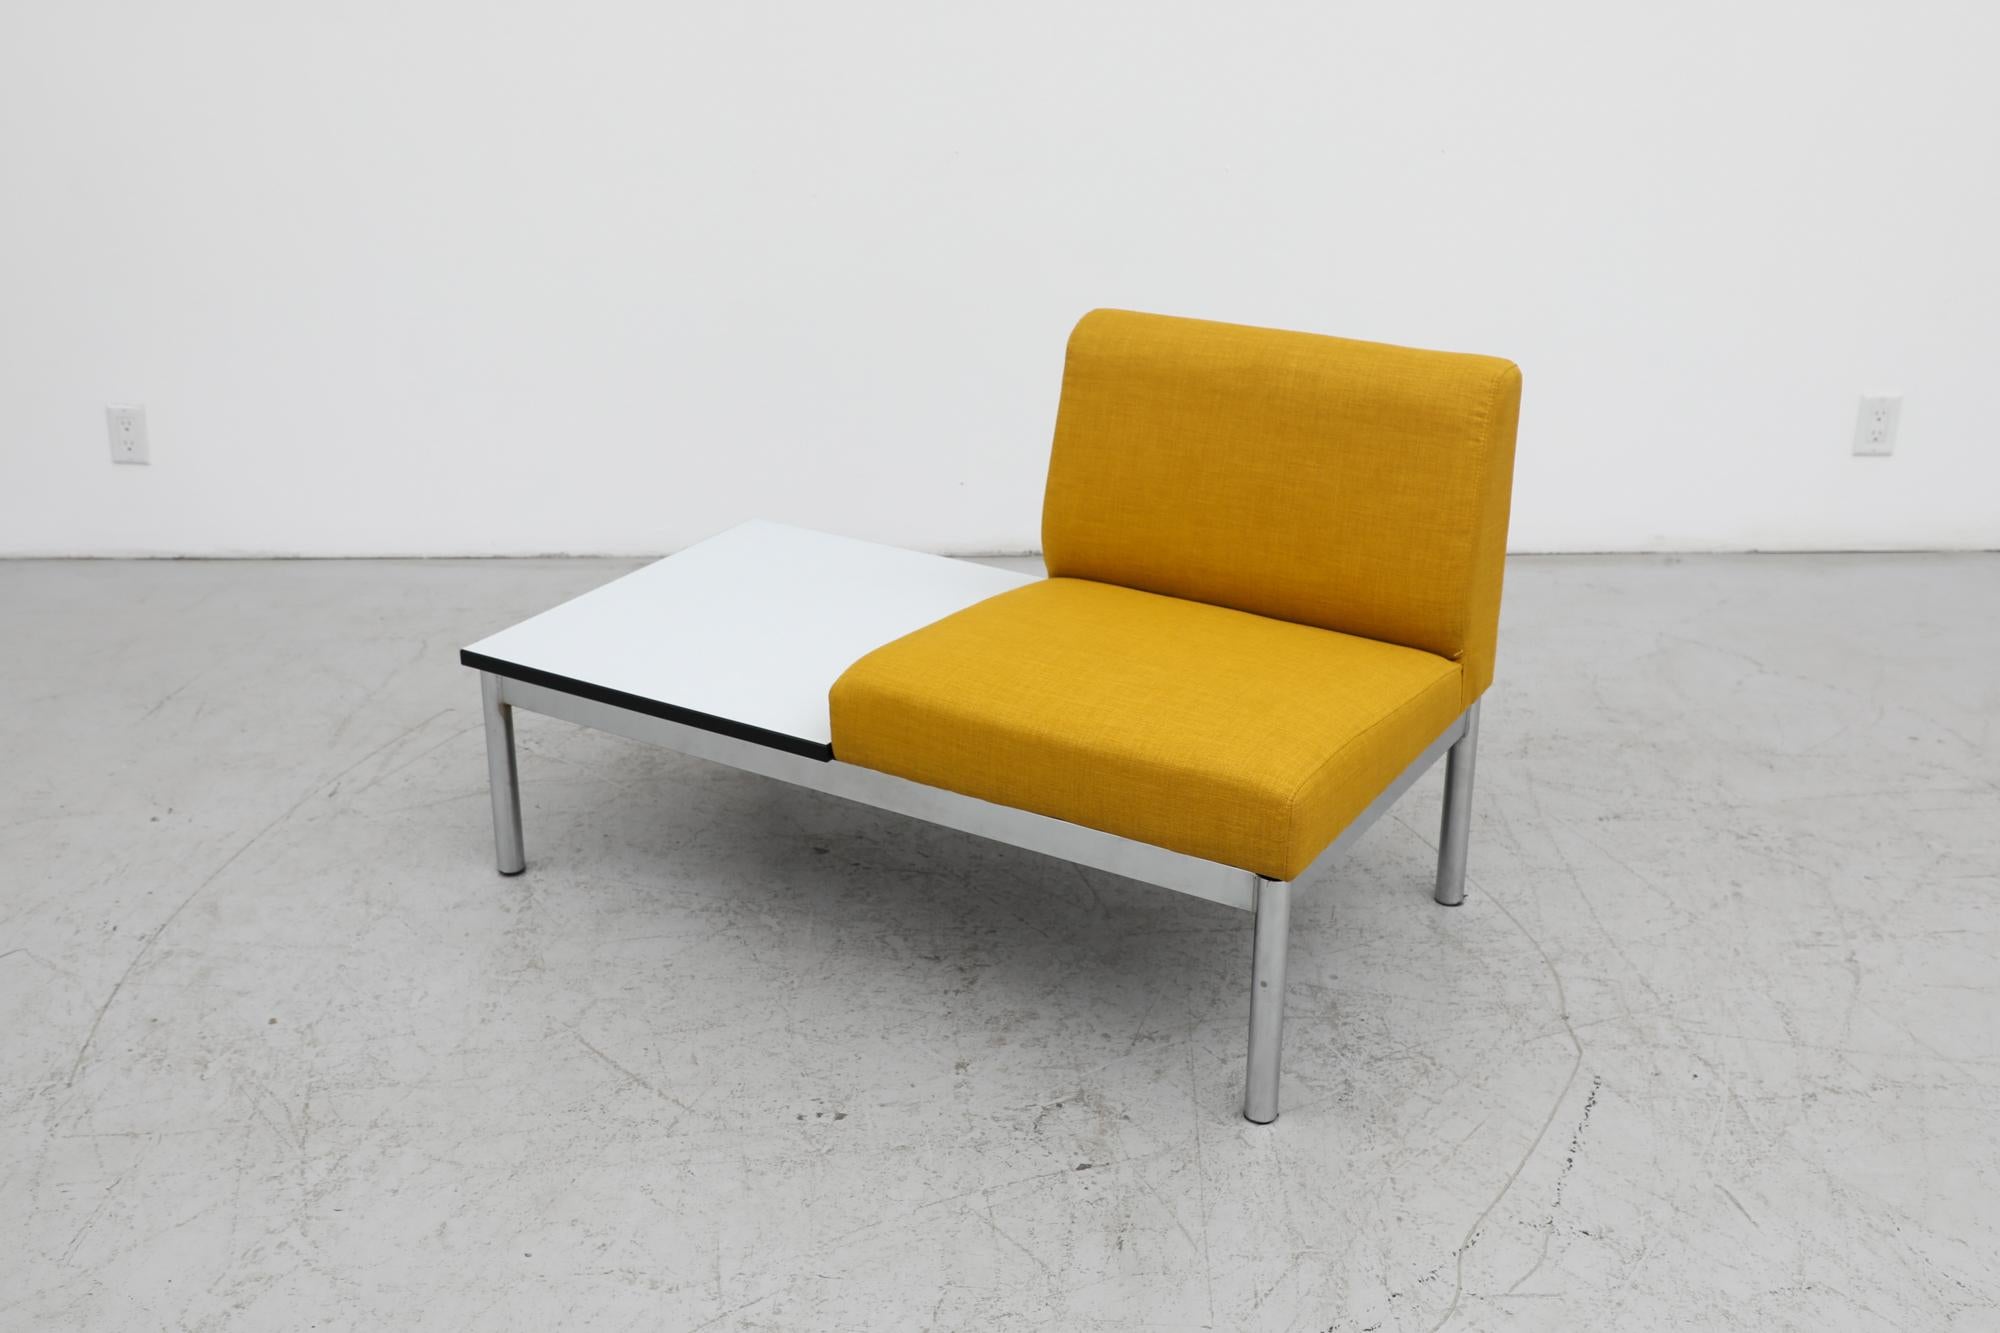 Mid-Century Kho Liang Ie Style chair with connected table, chrome frame and newly upholstered yellow seating. These are easy to swap positions by simply unscrewing from the base and flipping the seat direction, or swapping with a different unit, see